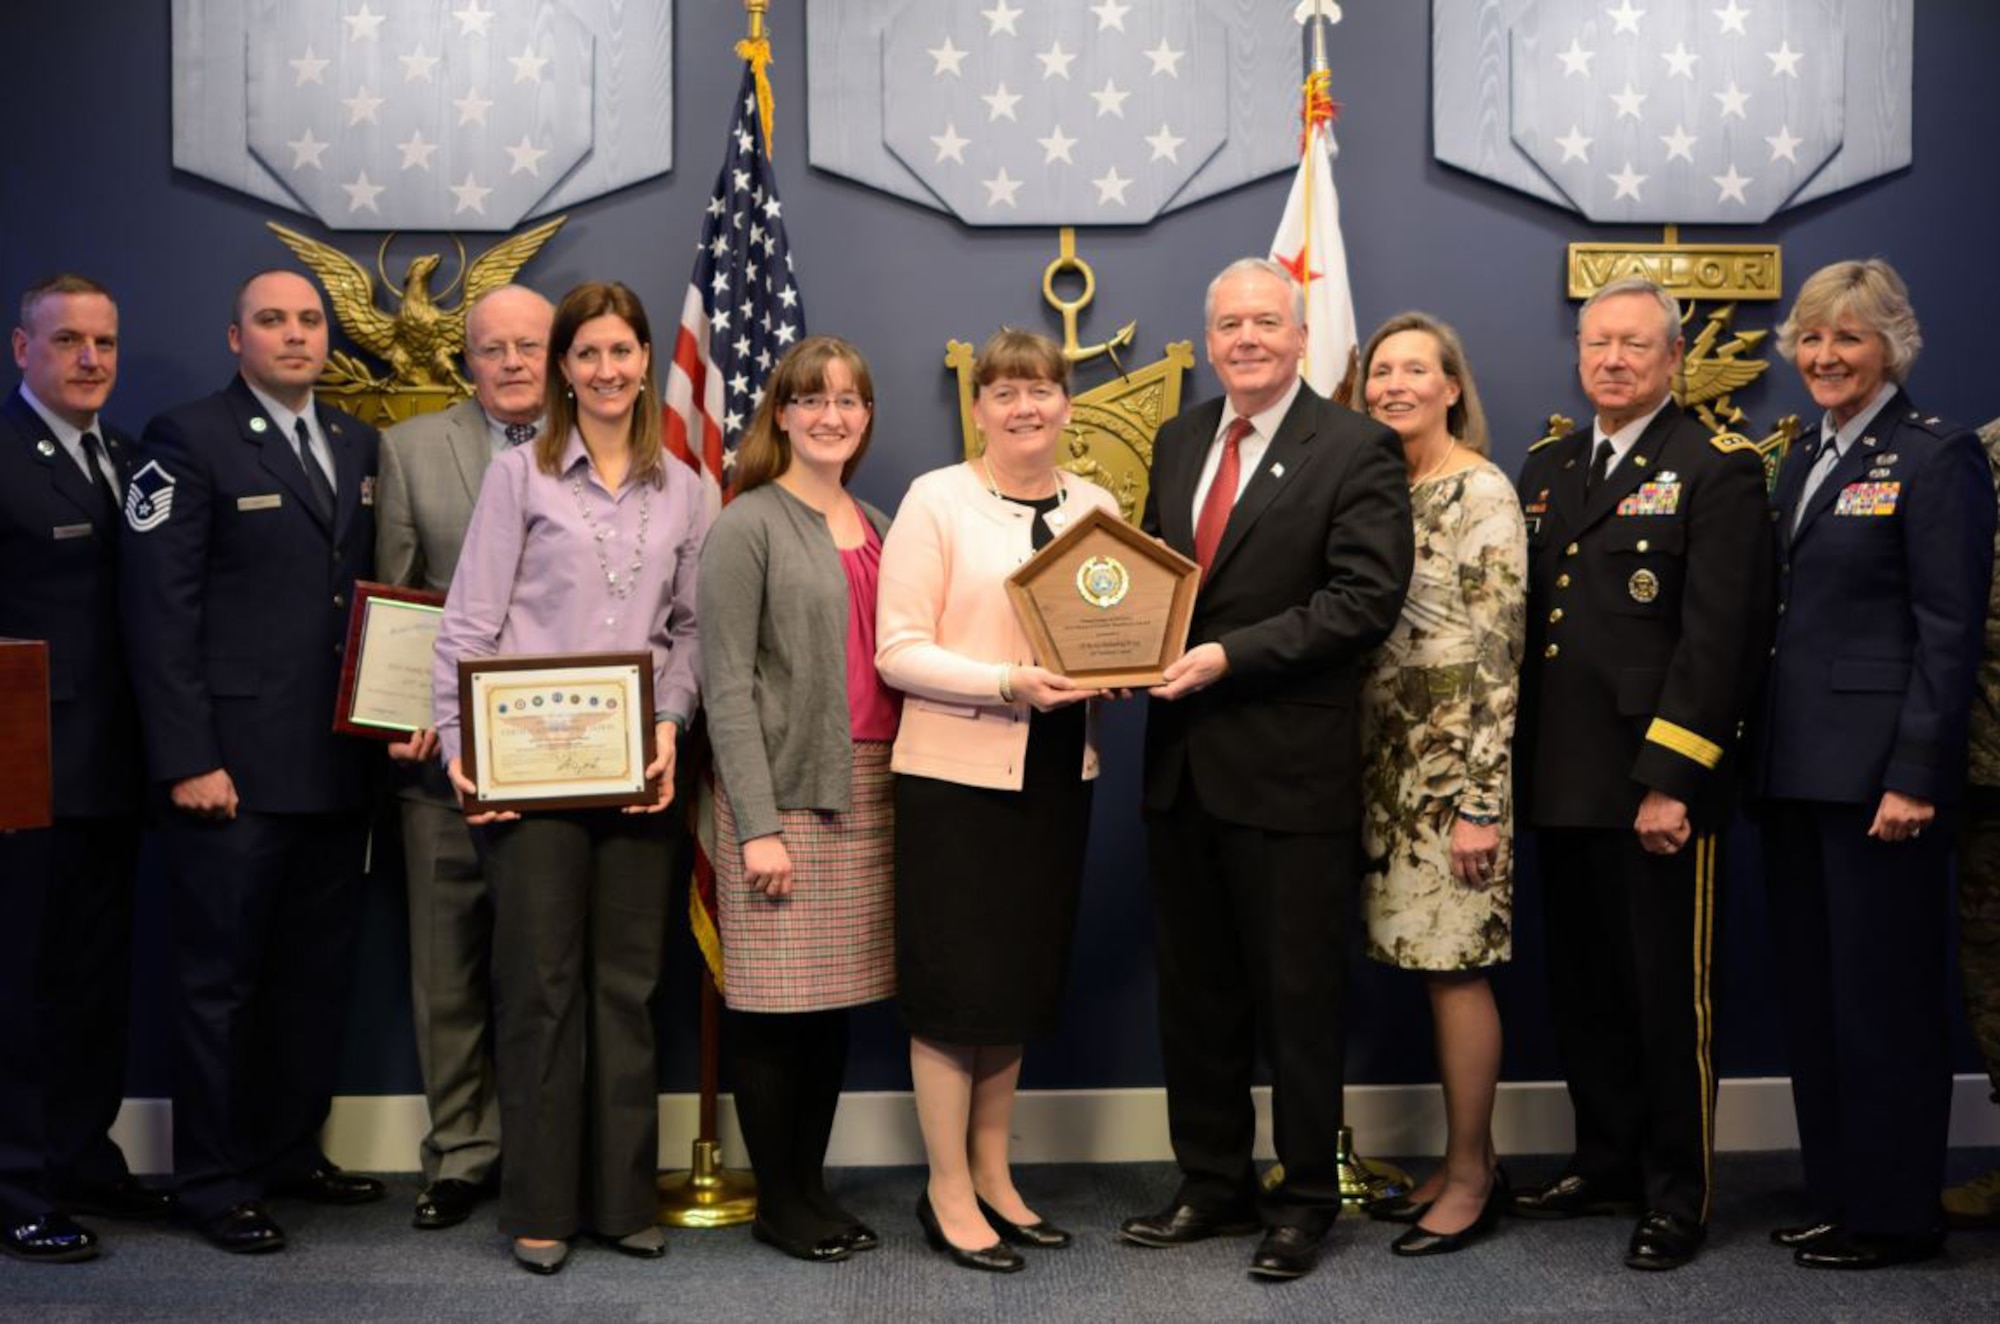 Bonnie Rice (center) accepts on behalf of the 157th Air Refueling Wing Airman and Family Readiness Program a plaque for the 2014 Reserve Family Readiness Awards from Richard O. Wightman Jr., principal deputy assistant secretary of defense for reserve affairs, during a ceremony at the Pentagon's Hall of Heroes, Feb. 27. DOD honored the top unit in each reserve component for its outstanding programs that support unit missions and family readiness. (DoD photo by Steve Turner, Office of the Secretary of Defense, Reserve Affairs)